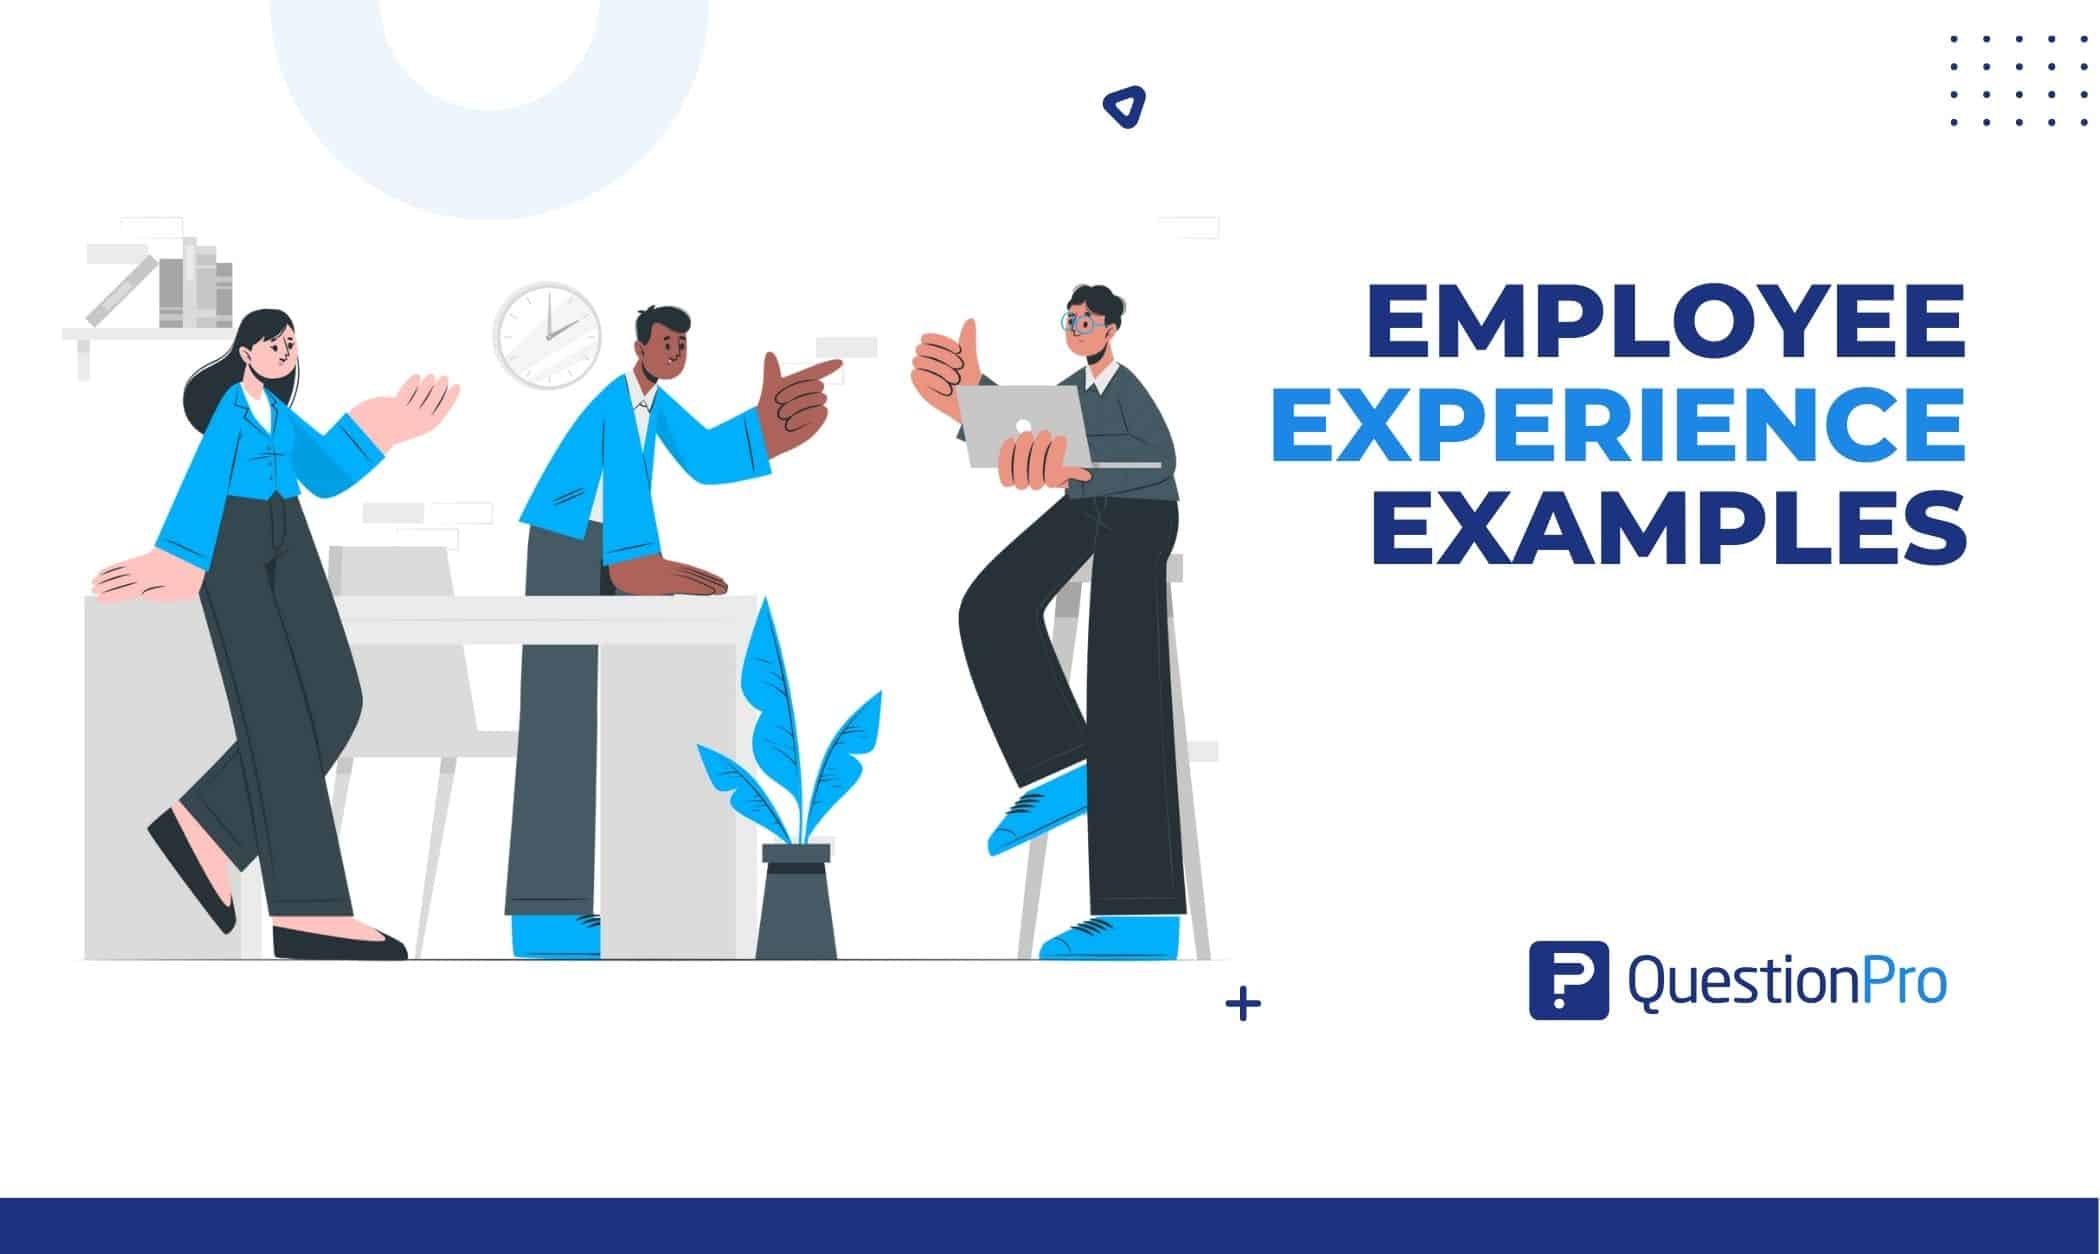 Check out these 10 compelling employee experience examples, and use what you learn to create a better environment for your employees. Read.